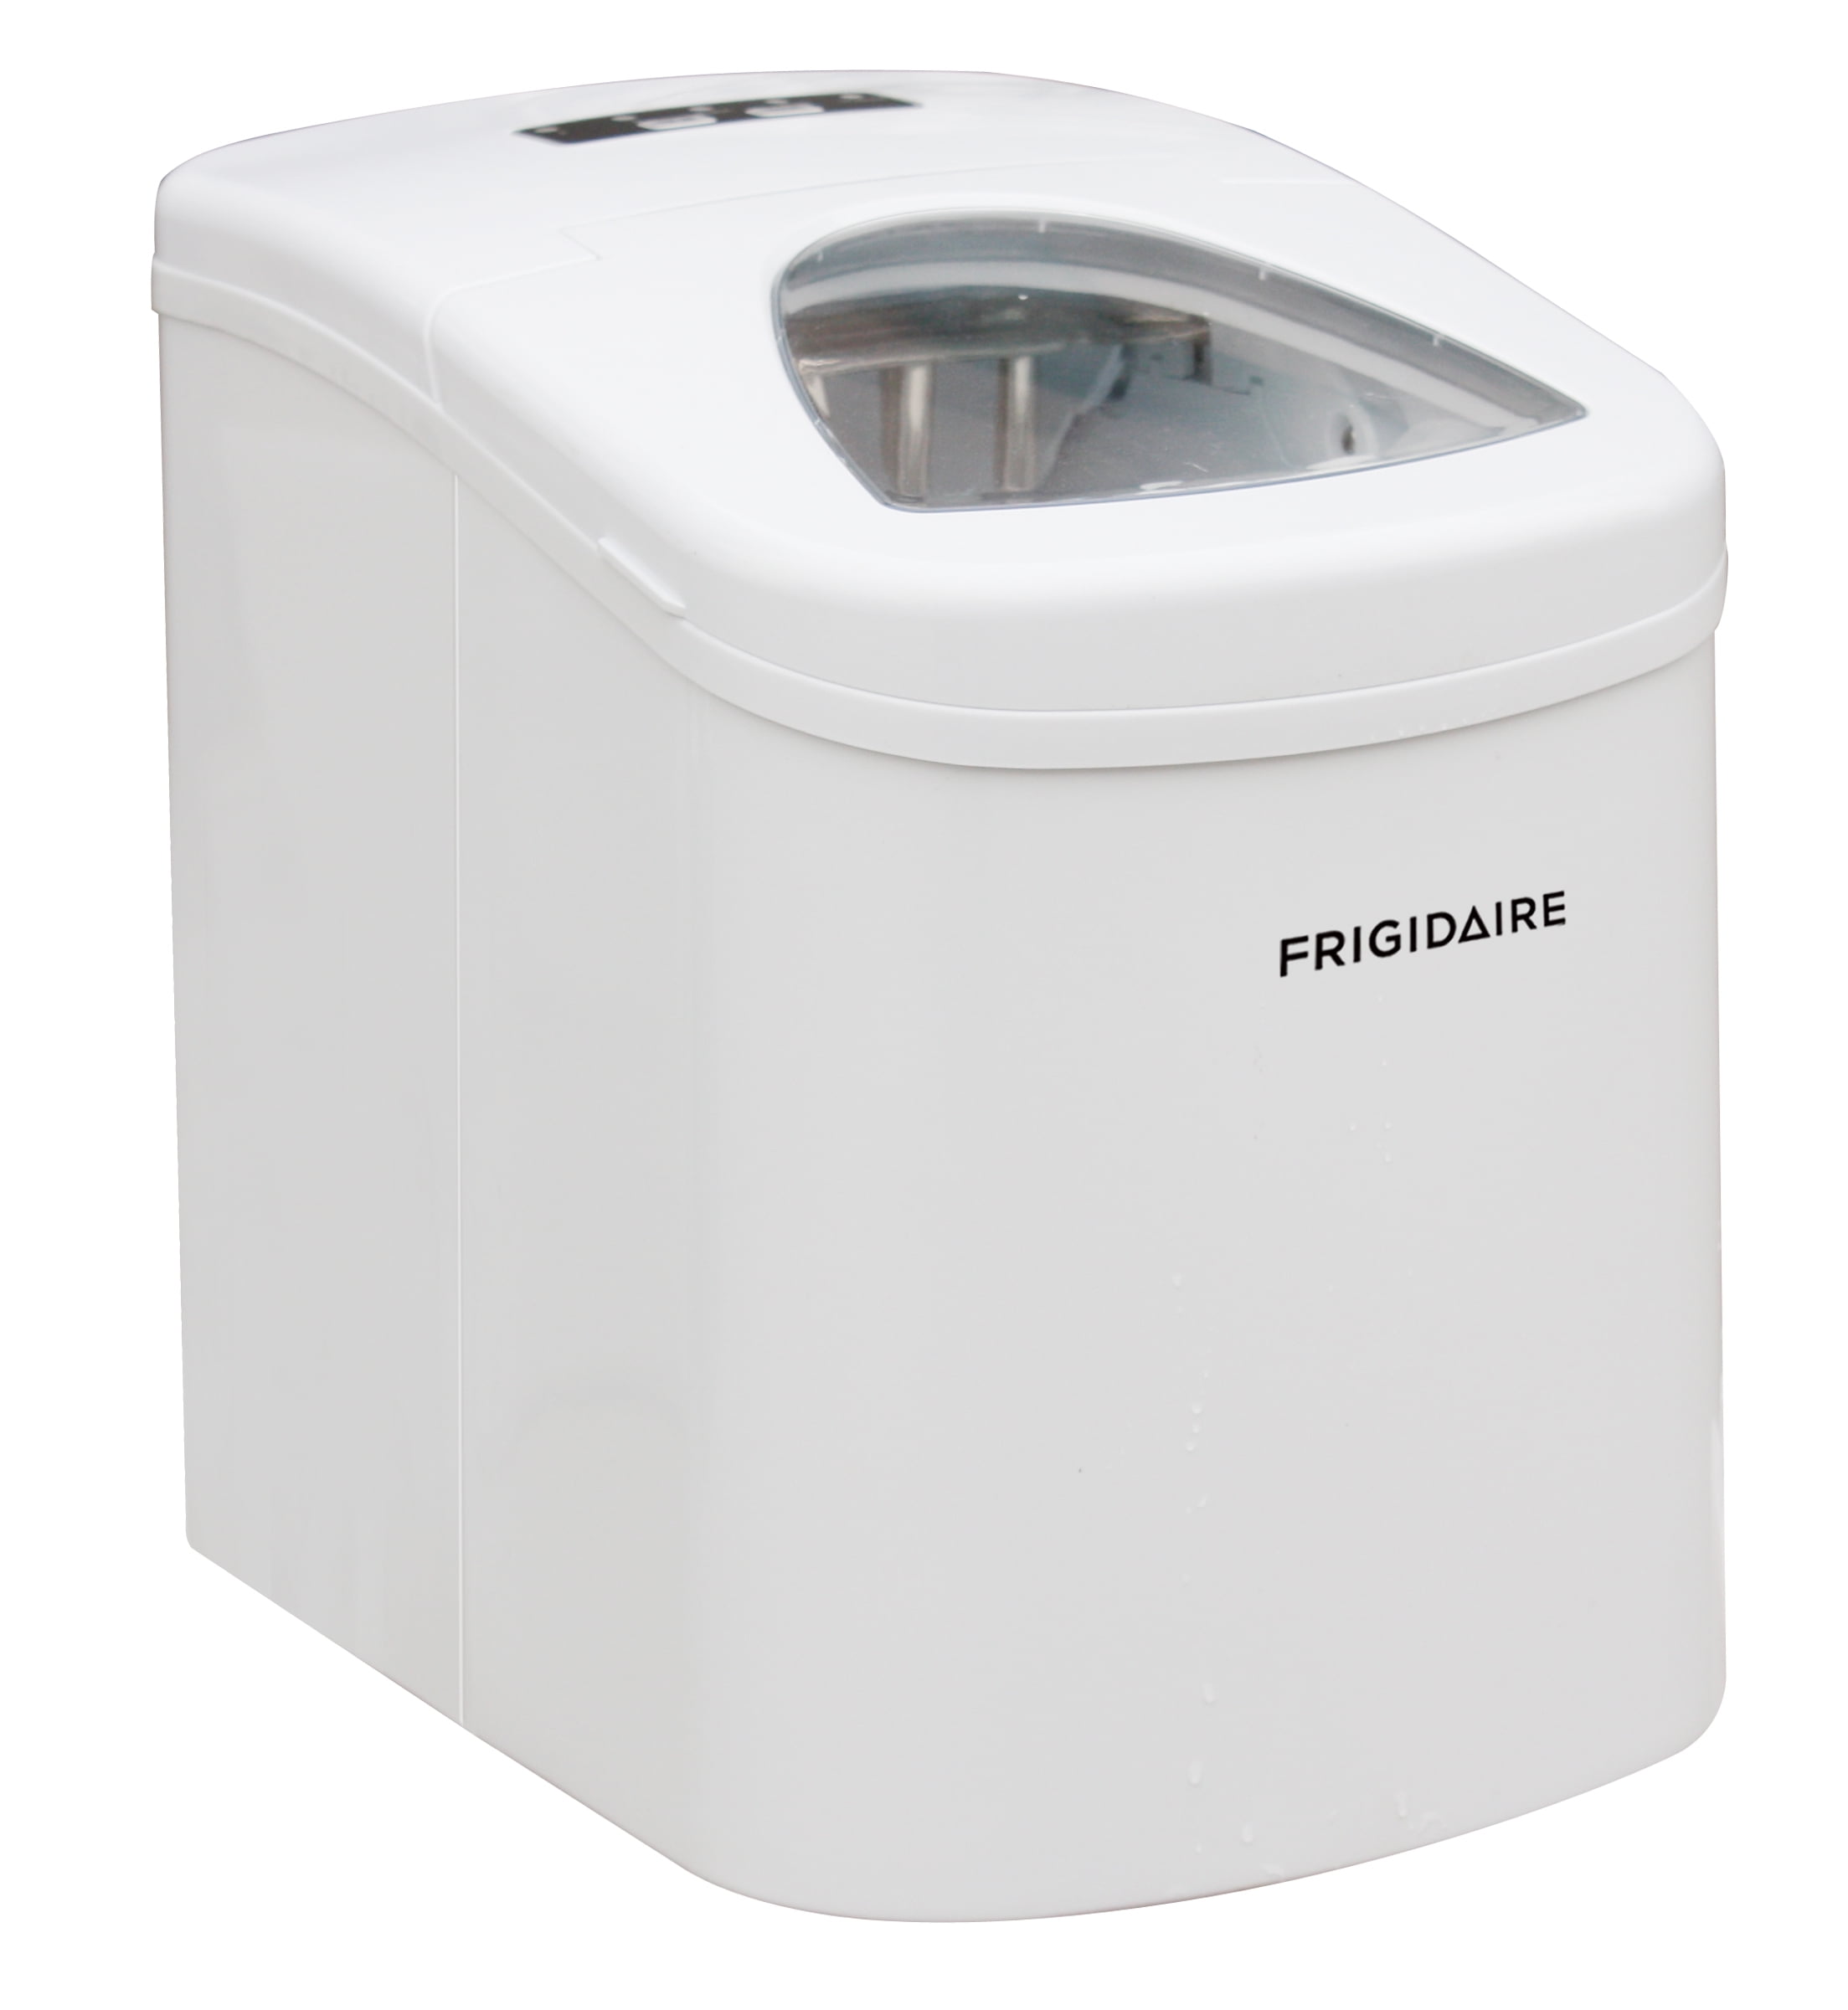 The Frigidaire Countertop Ice Maker Review: Is It Worth It